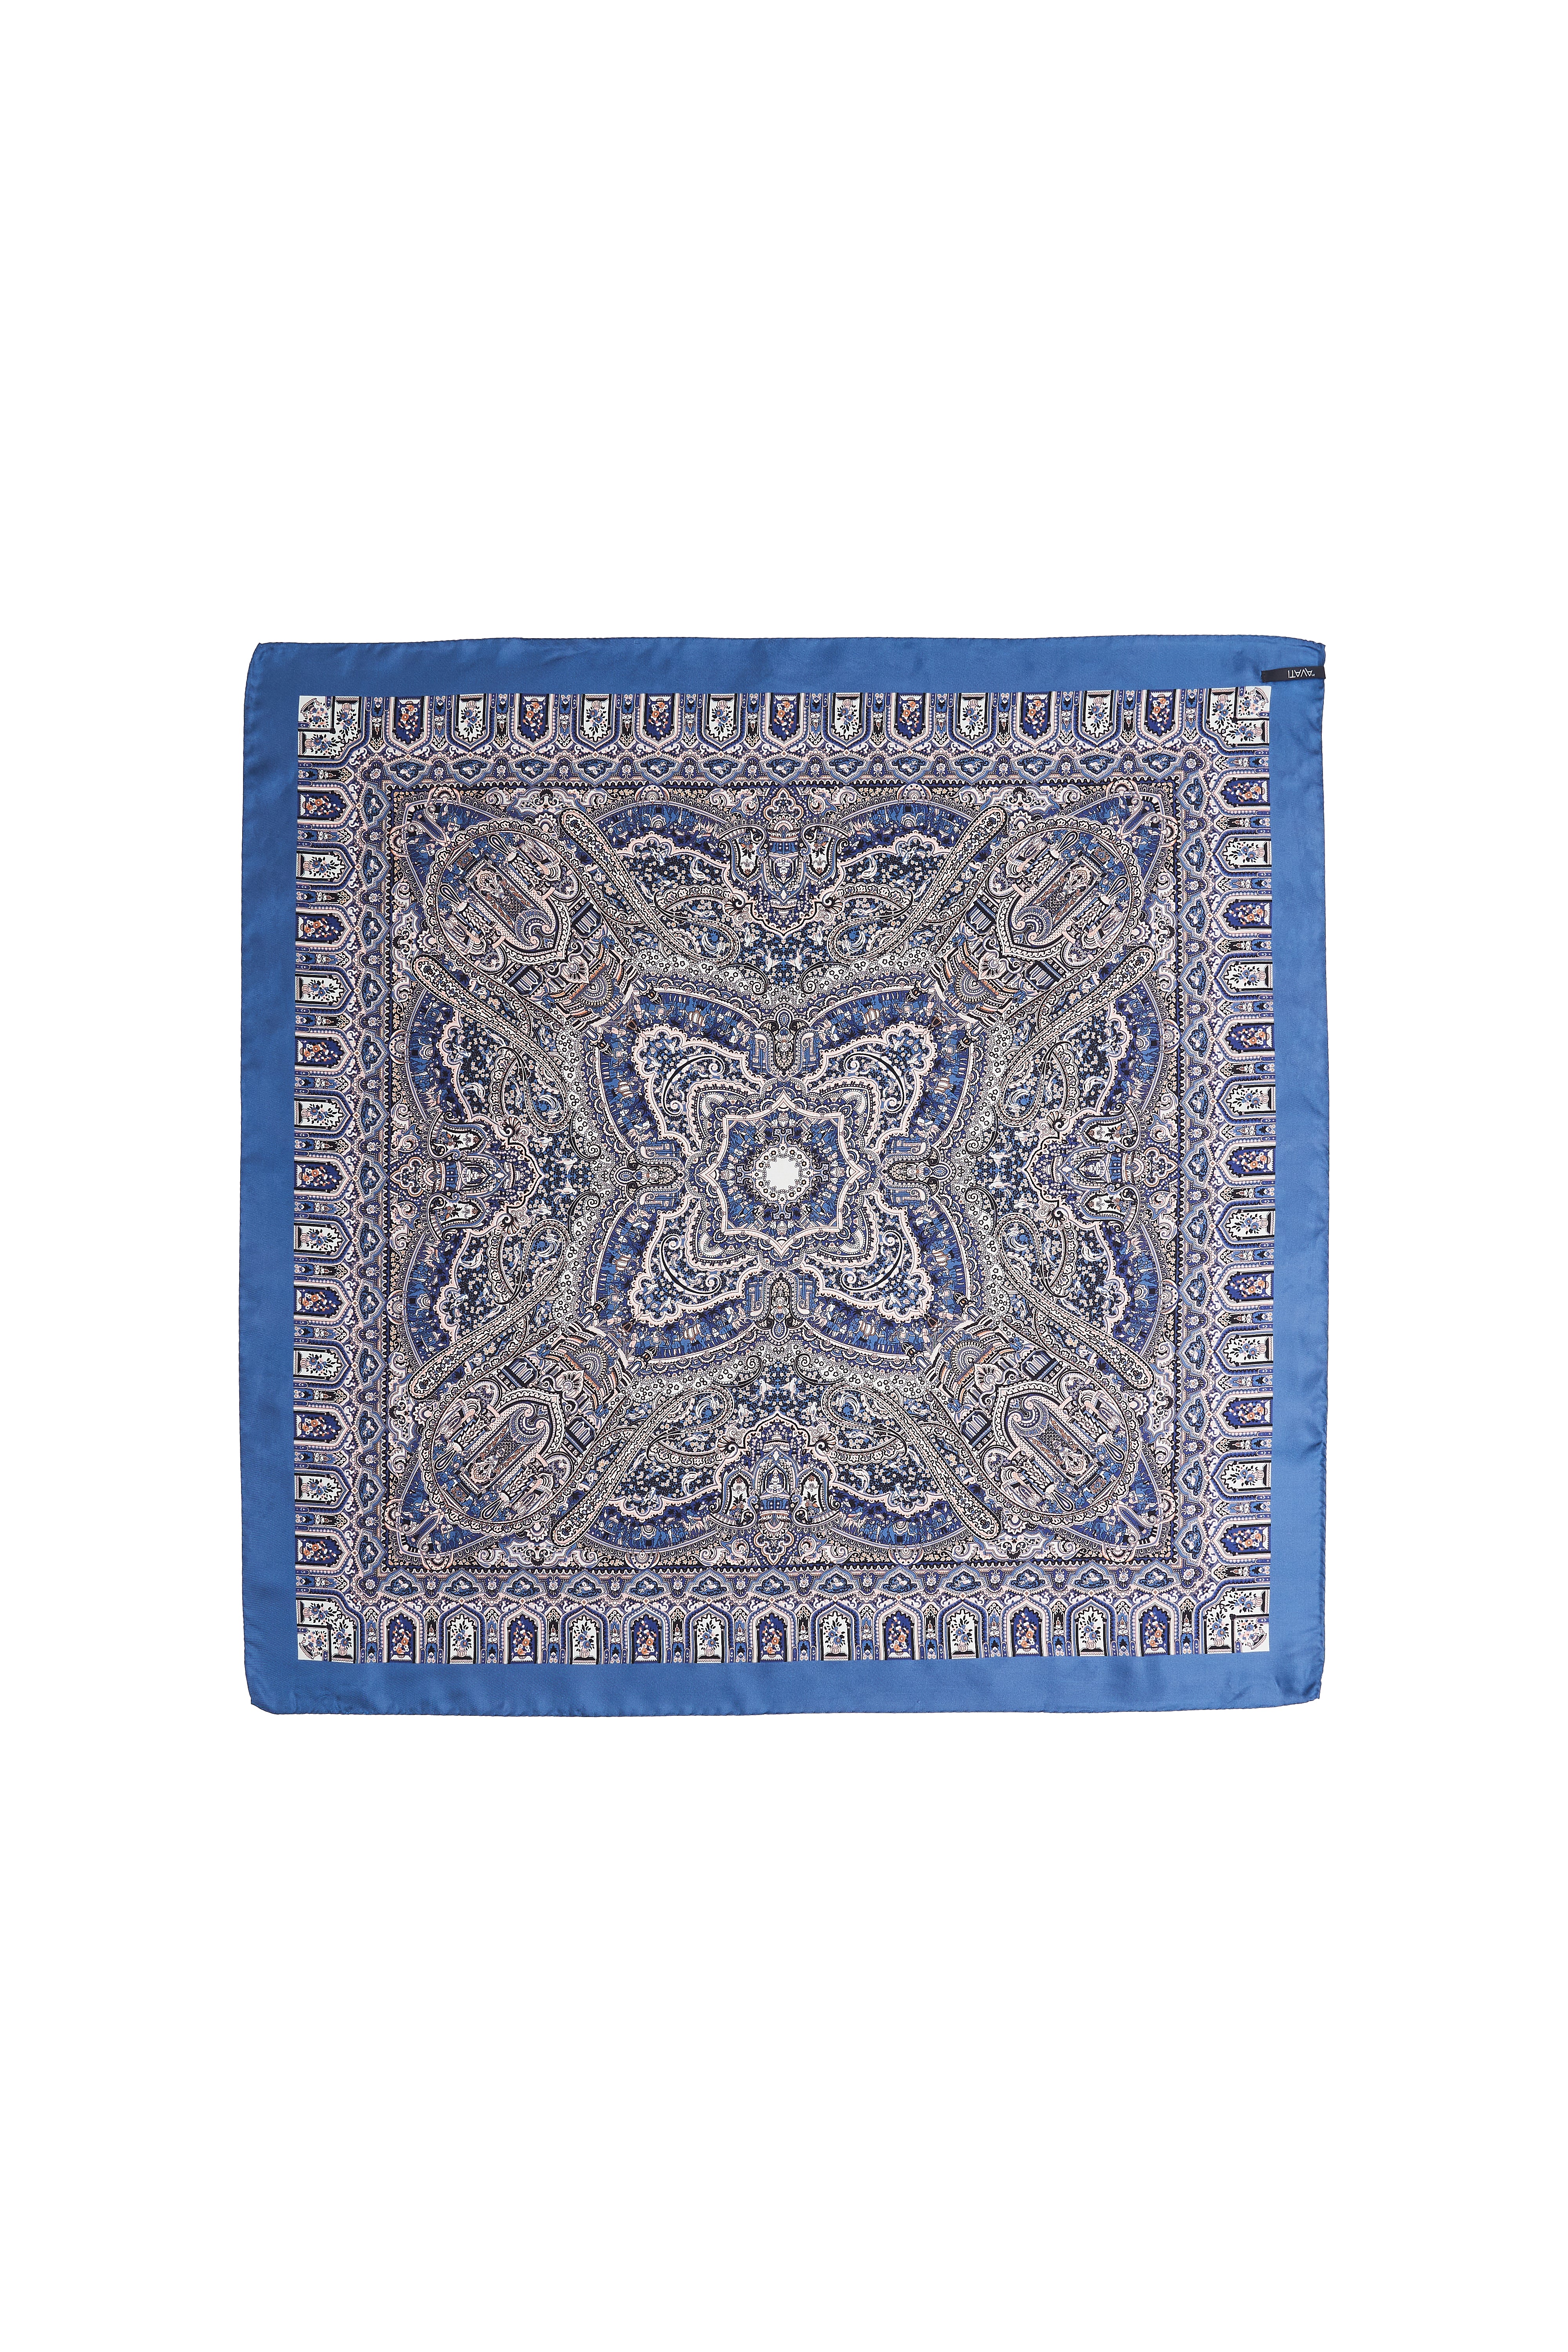 100% SILK PRINTED SCARF WITH BLUE FRAME